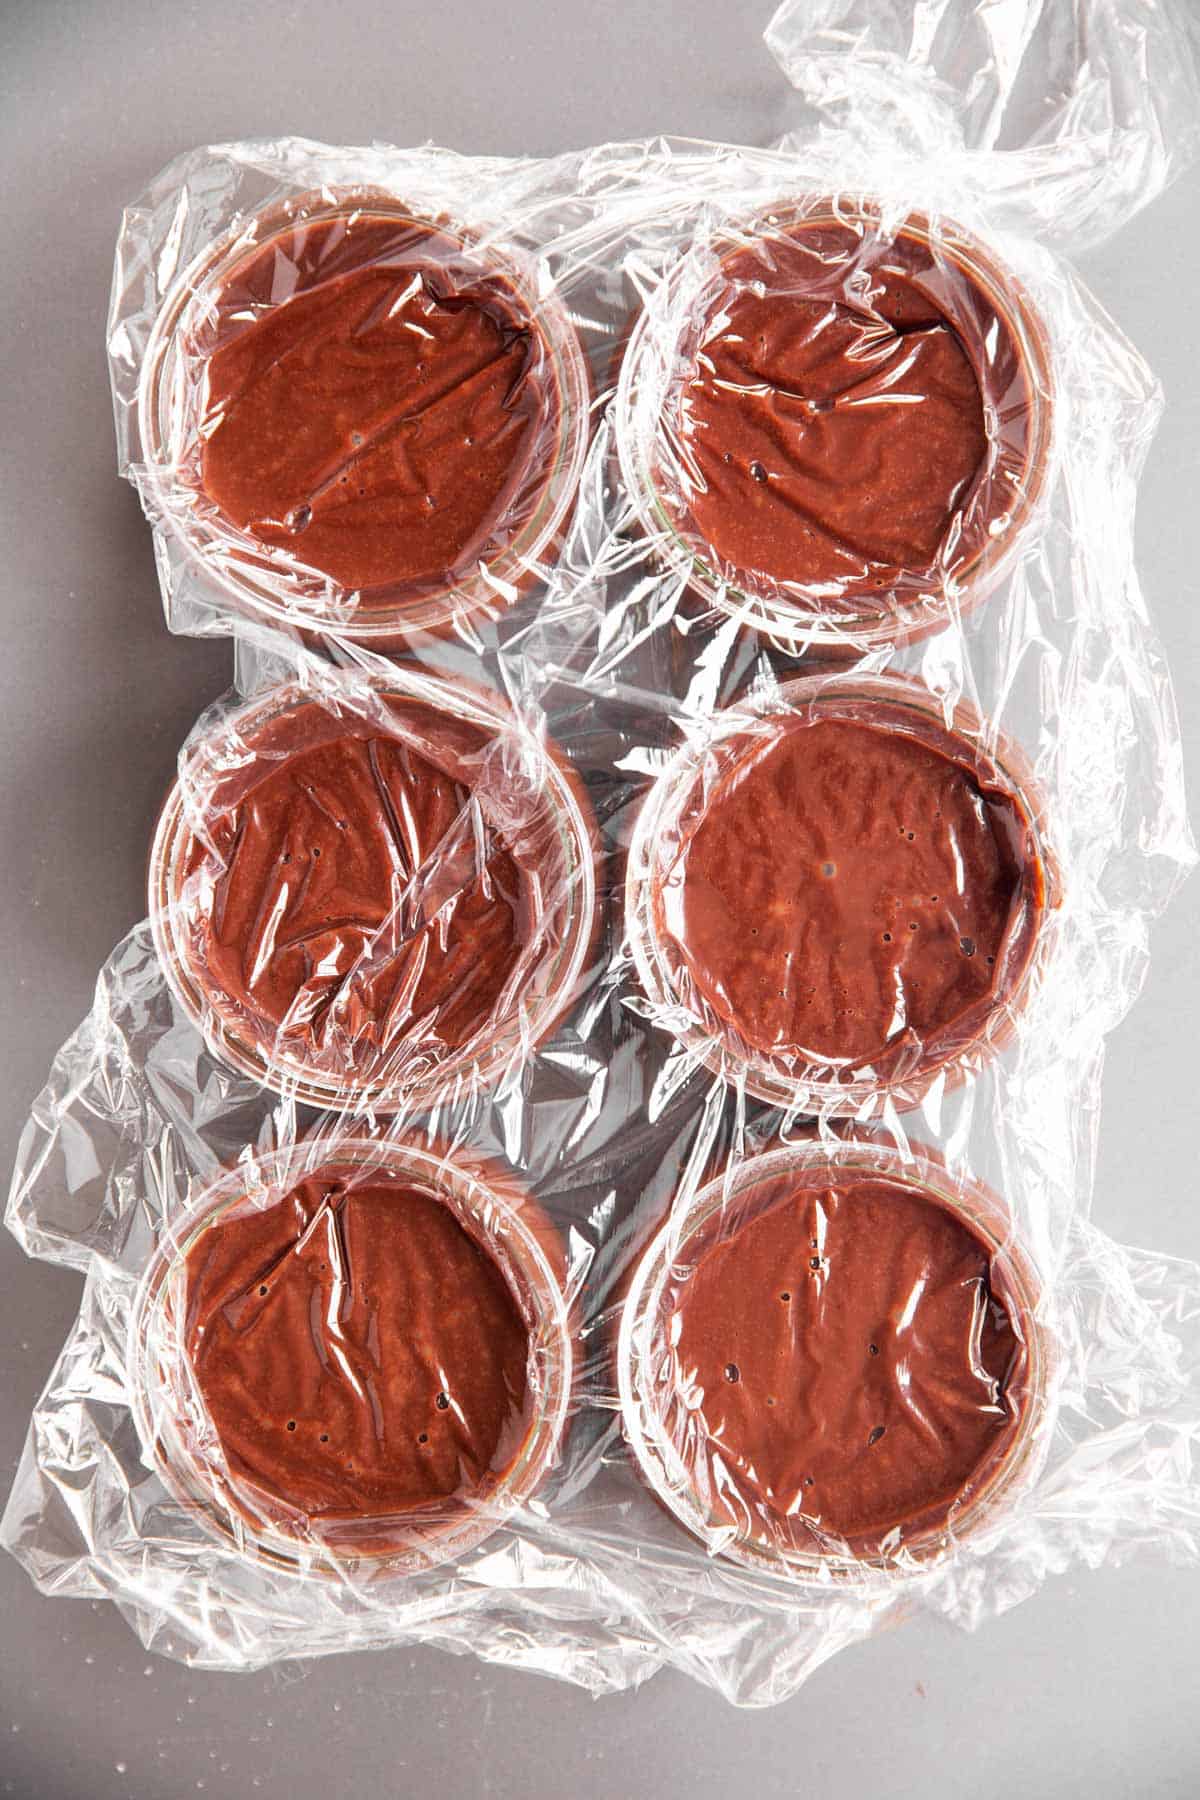 six glass jars filled with chocolate pudding, covered with plastic wrap